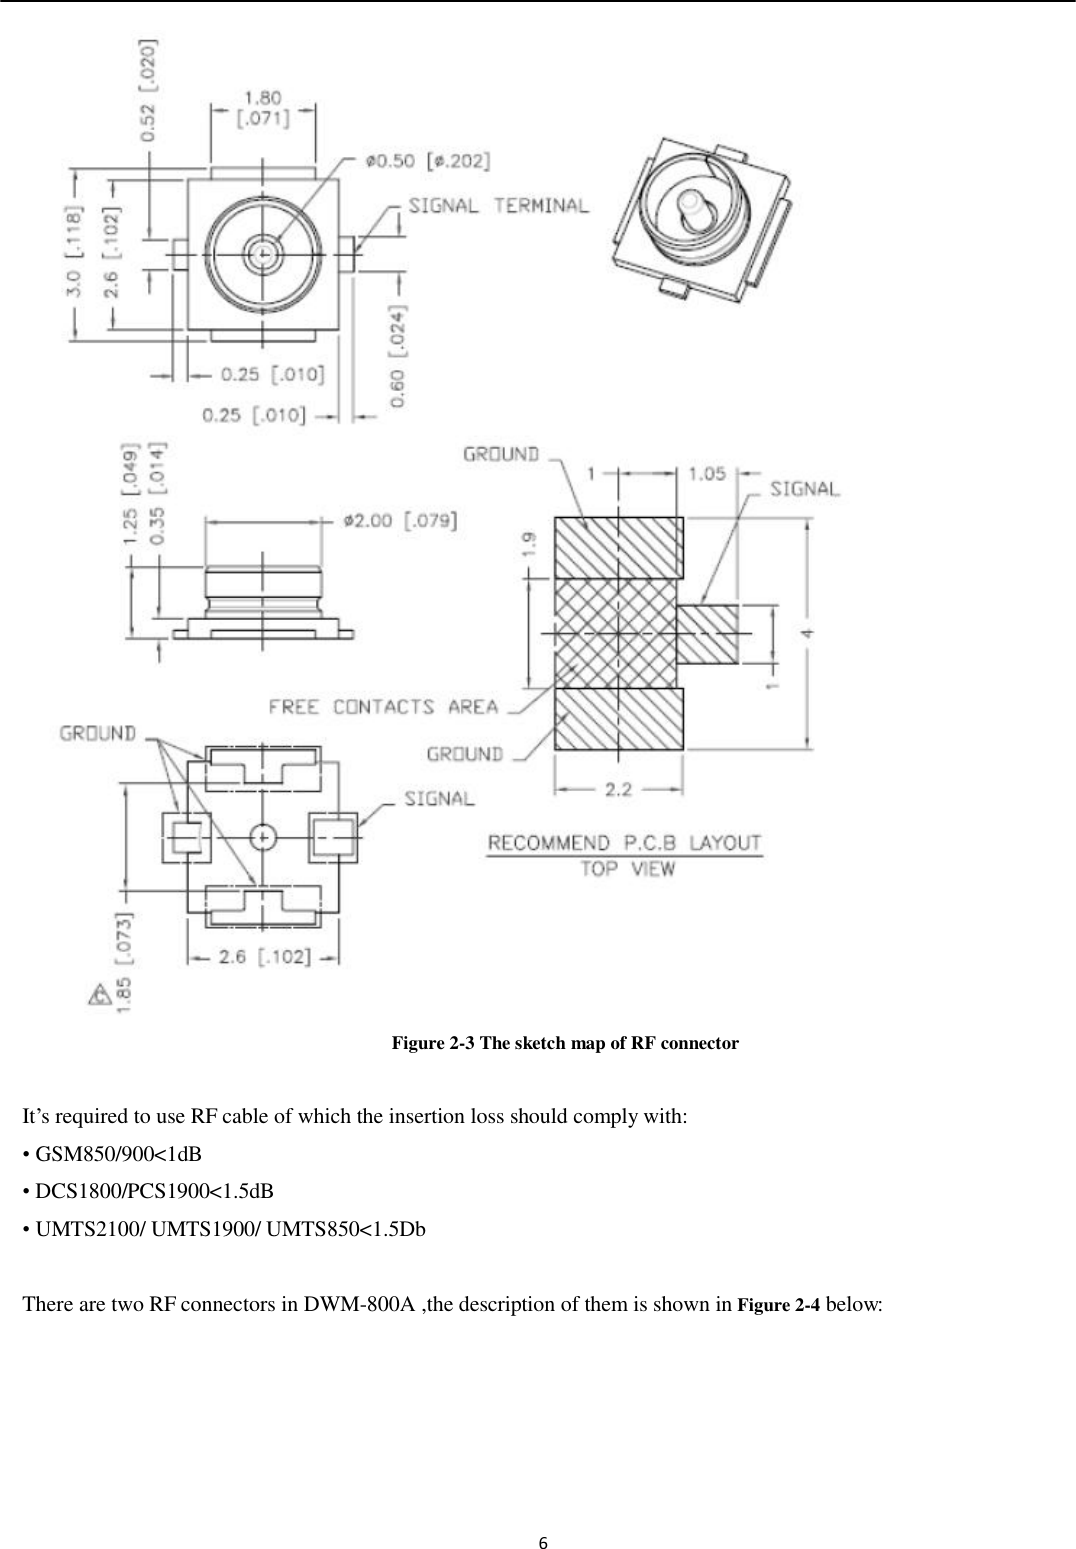   6   Figure 2-3 The sketch map of RF connector  It’s required to use RF cable of which the insertion loss should comply with: • GSM850/900&lt;1dB • DCS1800/PCS1900&lt;1.5dB • UMTS2100/ UMTS1900/ UMTS850&lt;1.5Db  There are two RF connectors in DWM-800A ,the description of them is shown in Figure 2-4 below:  